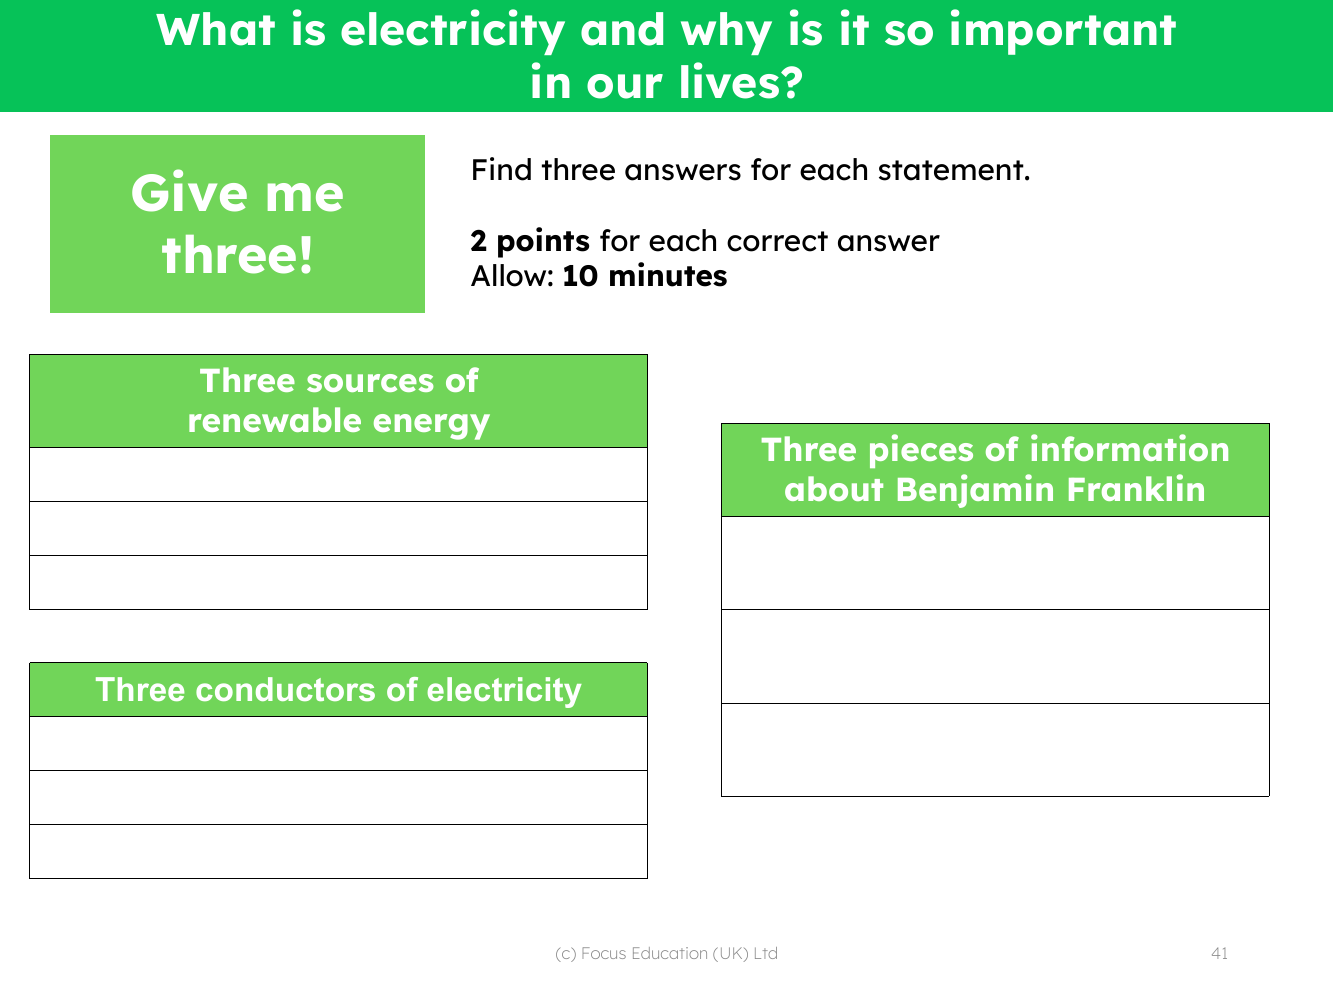 Give me 3 - Electricity